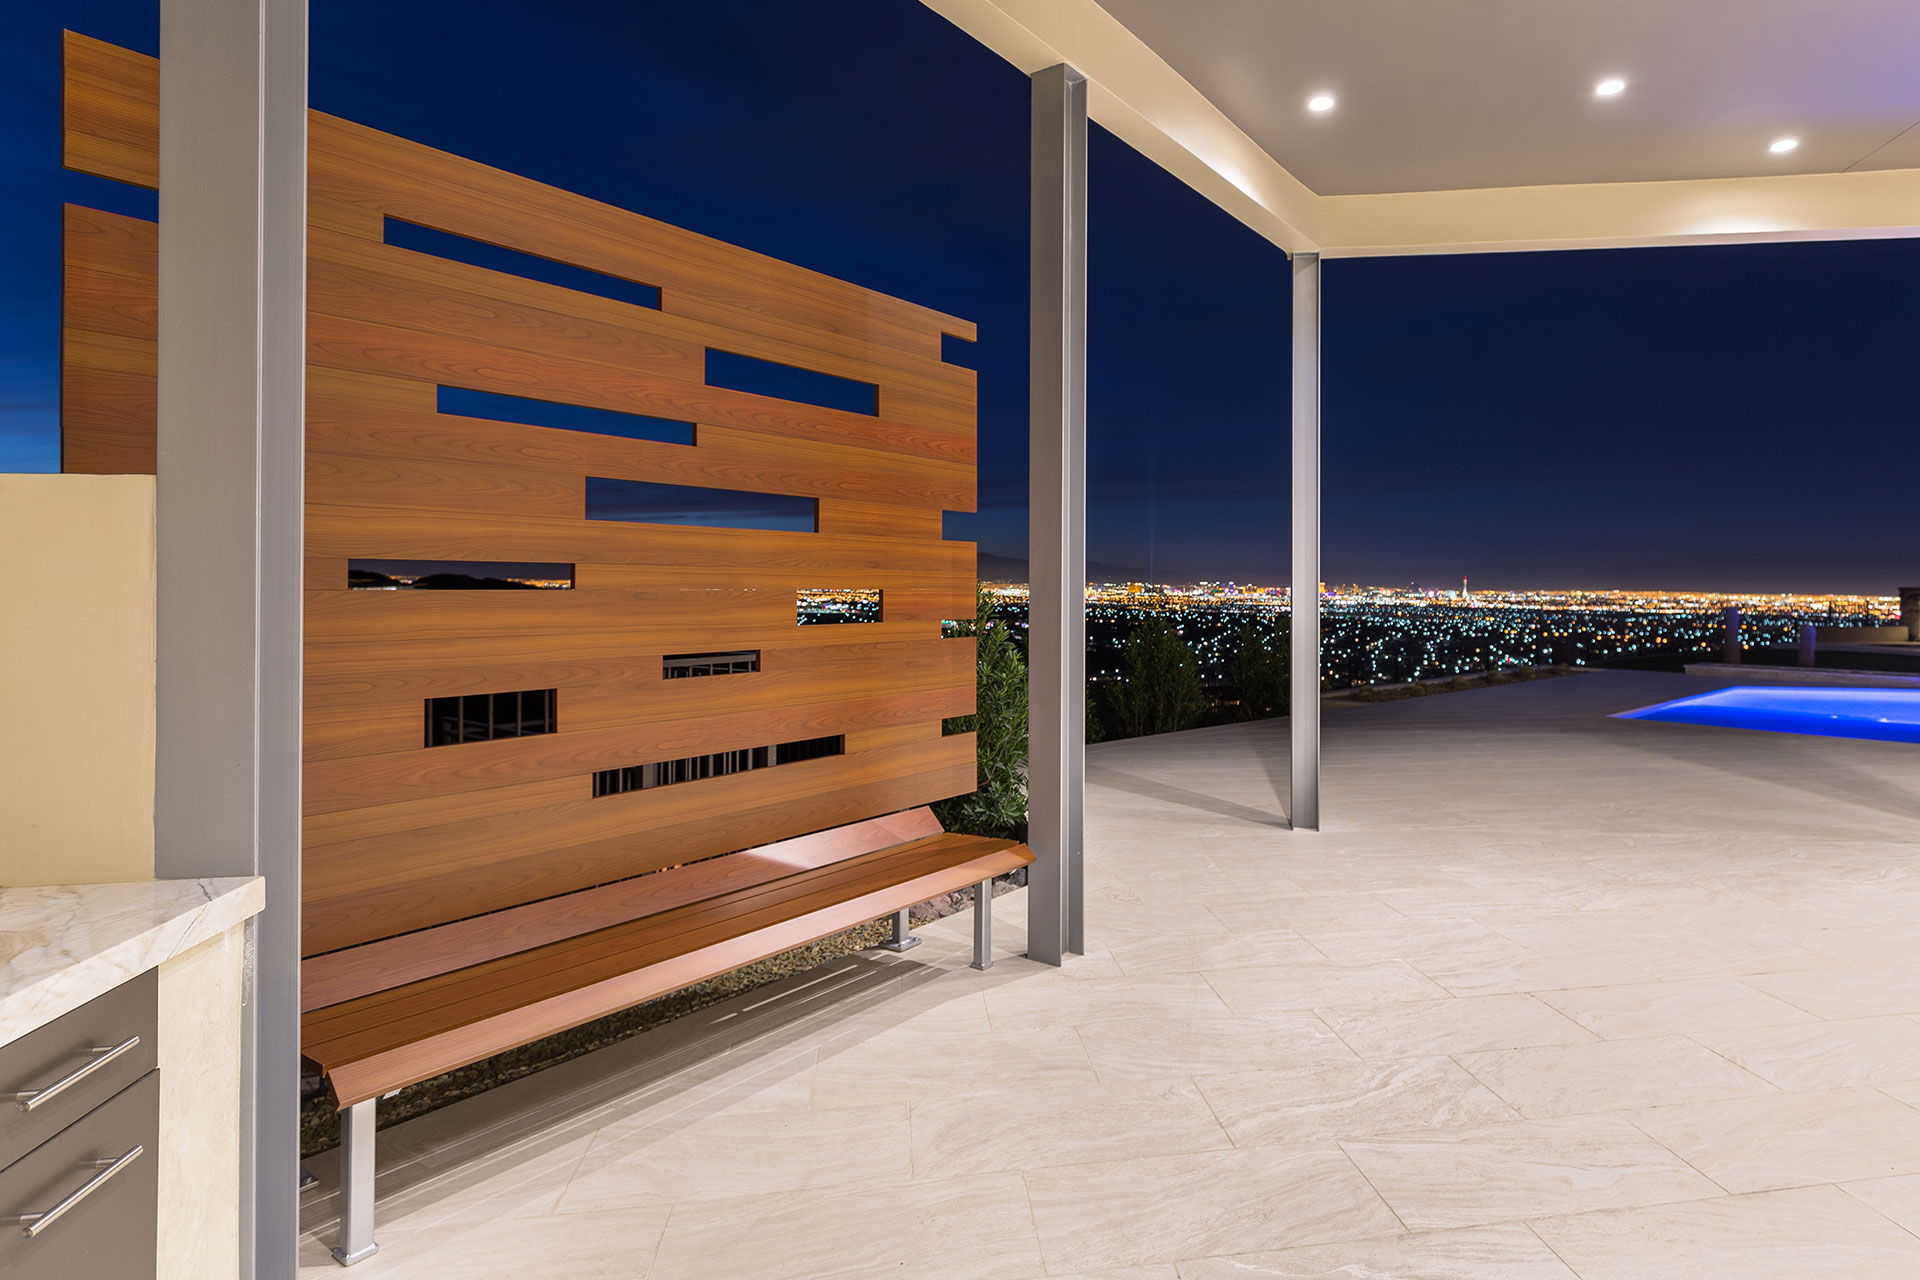 A wood-like aluminum backyard bench on a light beige tiled patio with Las Vegas city lights and a pool in the background.